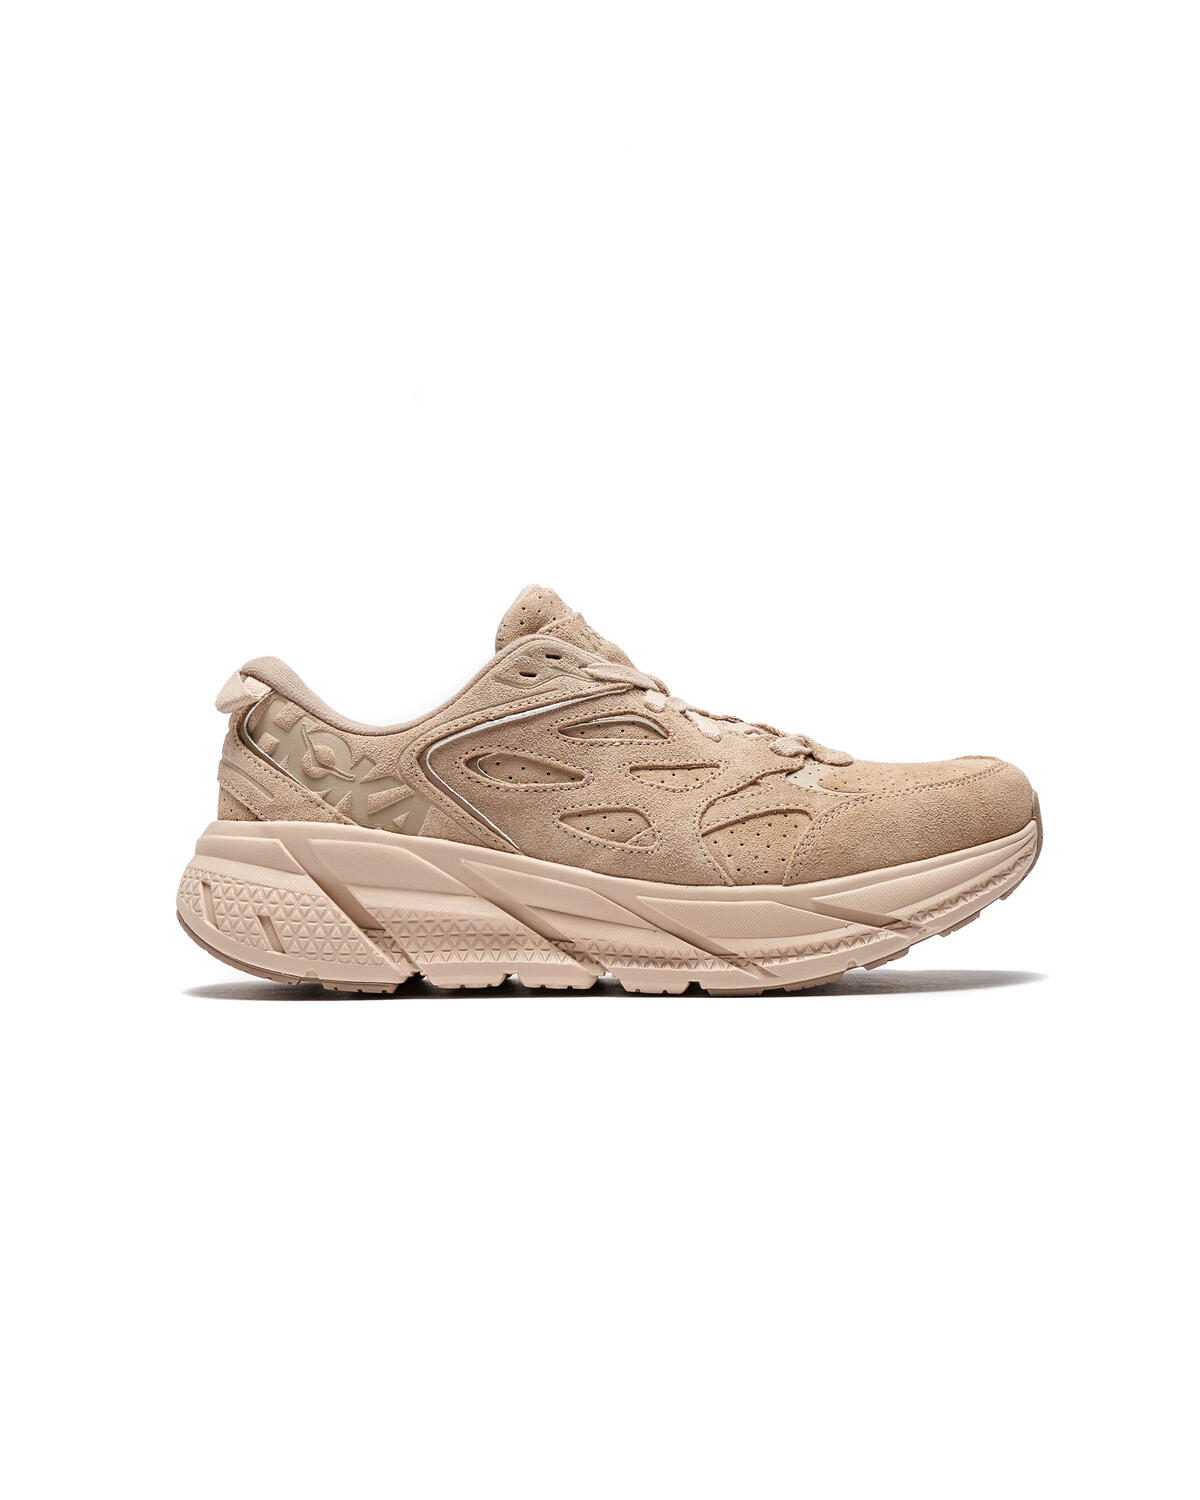 Hoka One One CLIFTON L SUEDE | 1122571-SSDD | AFEW STORE